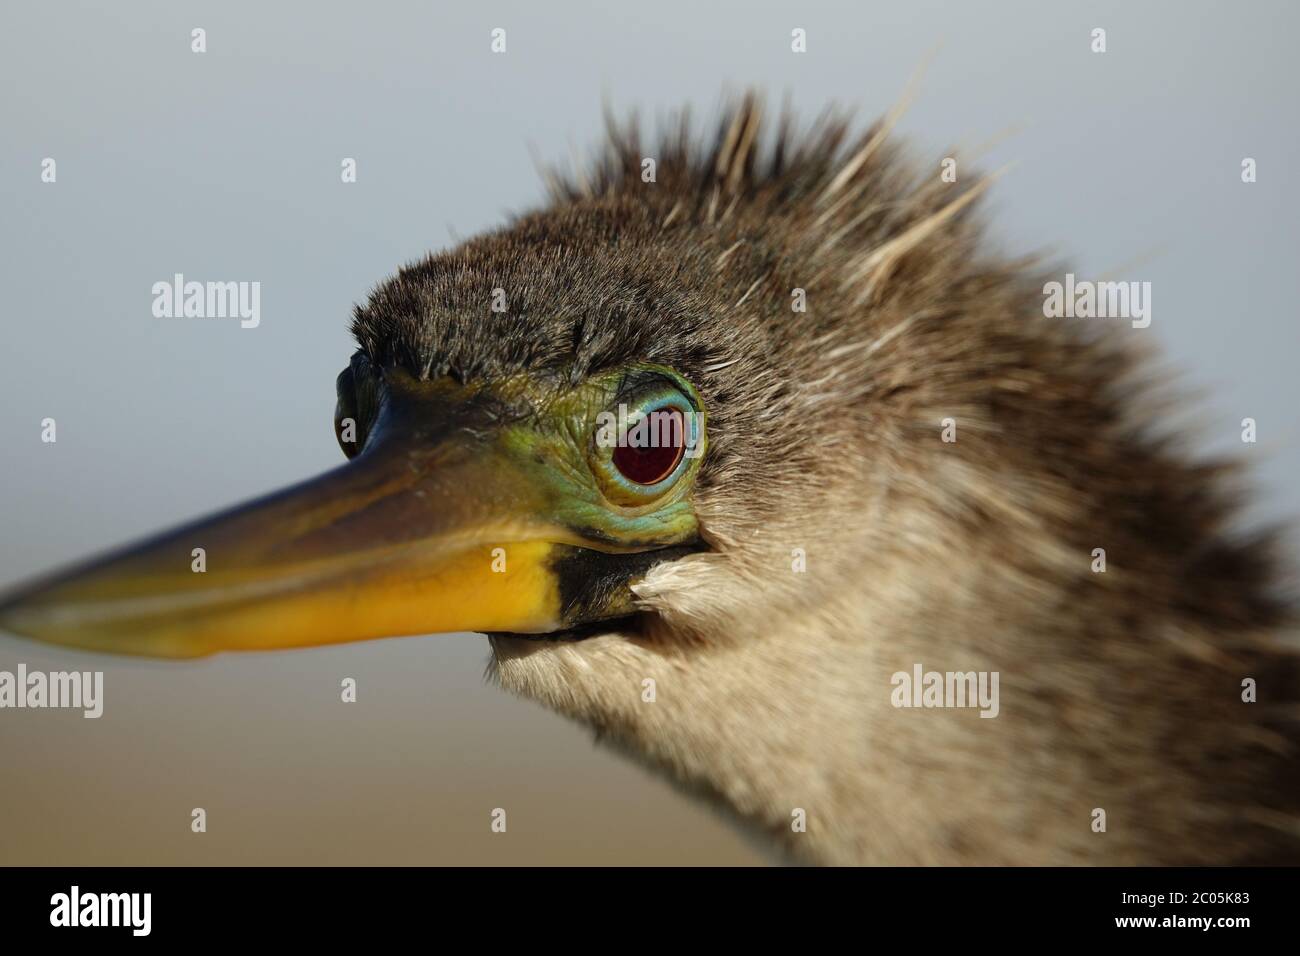 Capture of Anhinga in the Everglades national park, Florida. Stock Photo